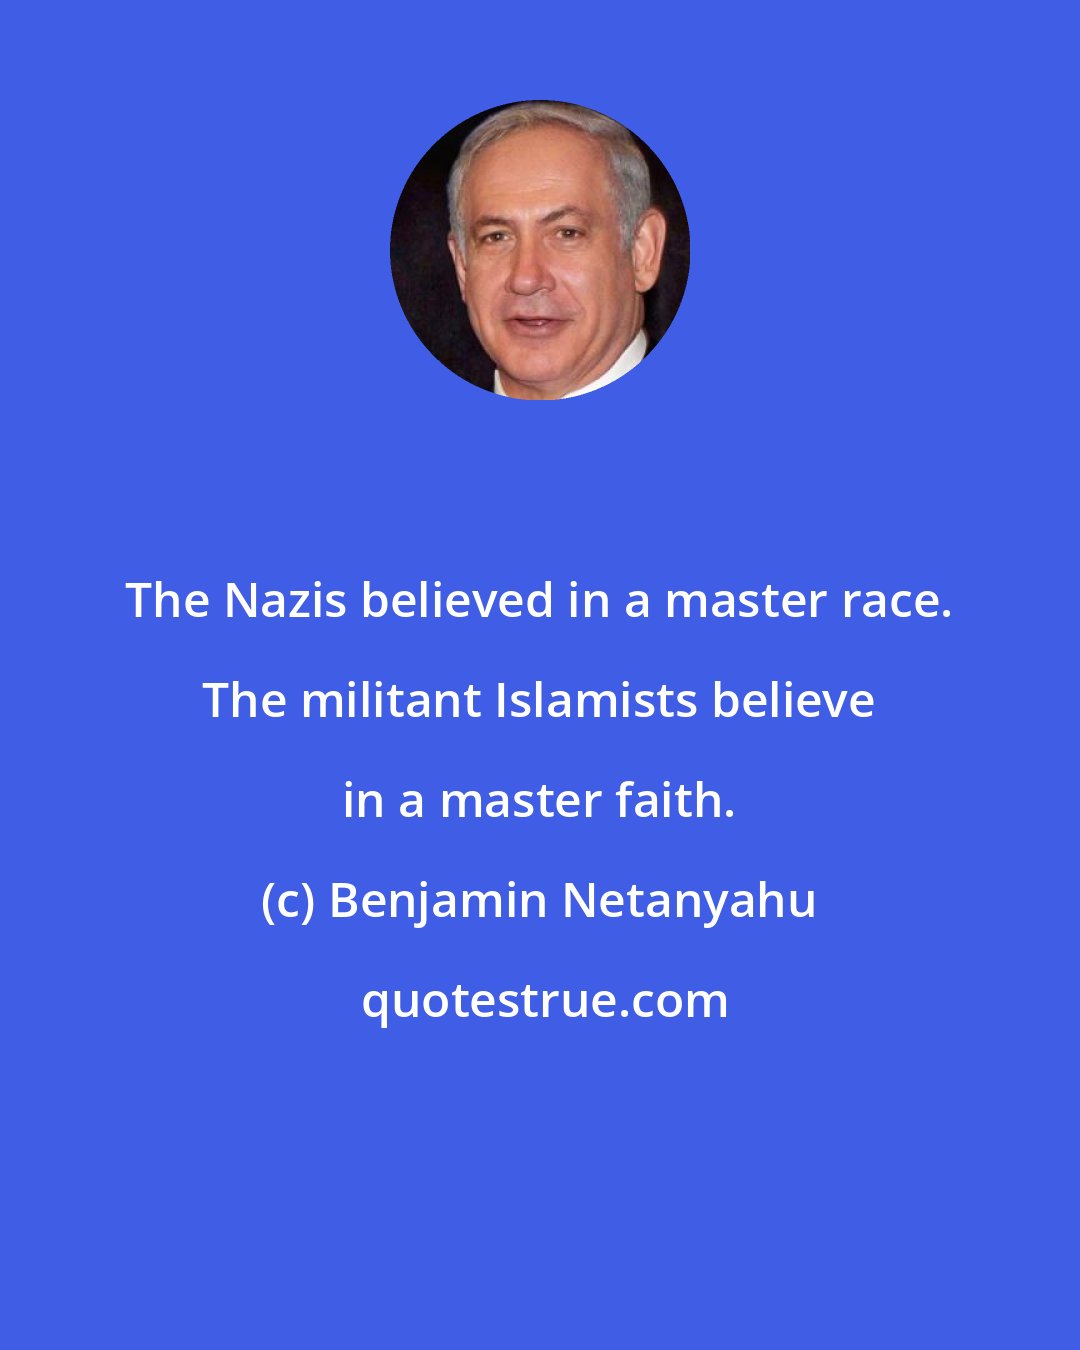 Benjamin Netanyahu: The Nazis believed in a master race. The militant Islamists believe in a master faith.